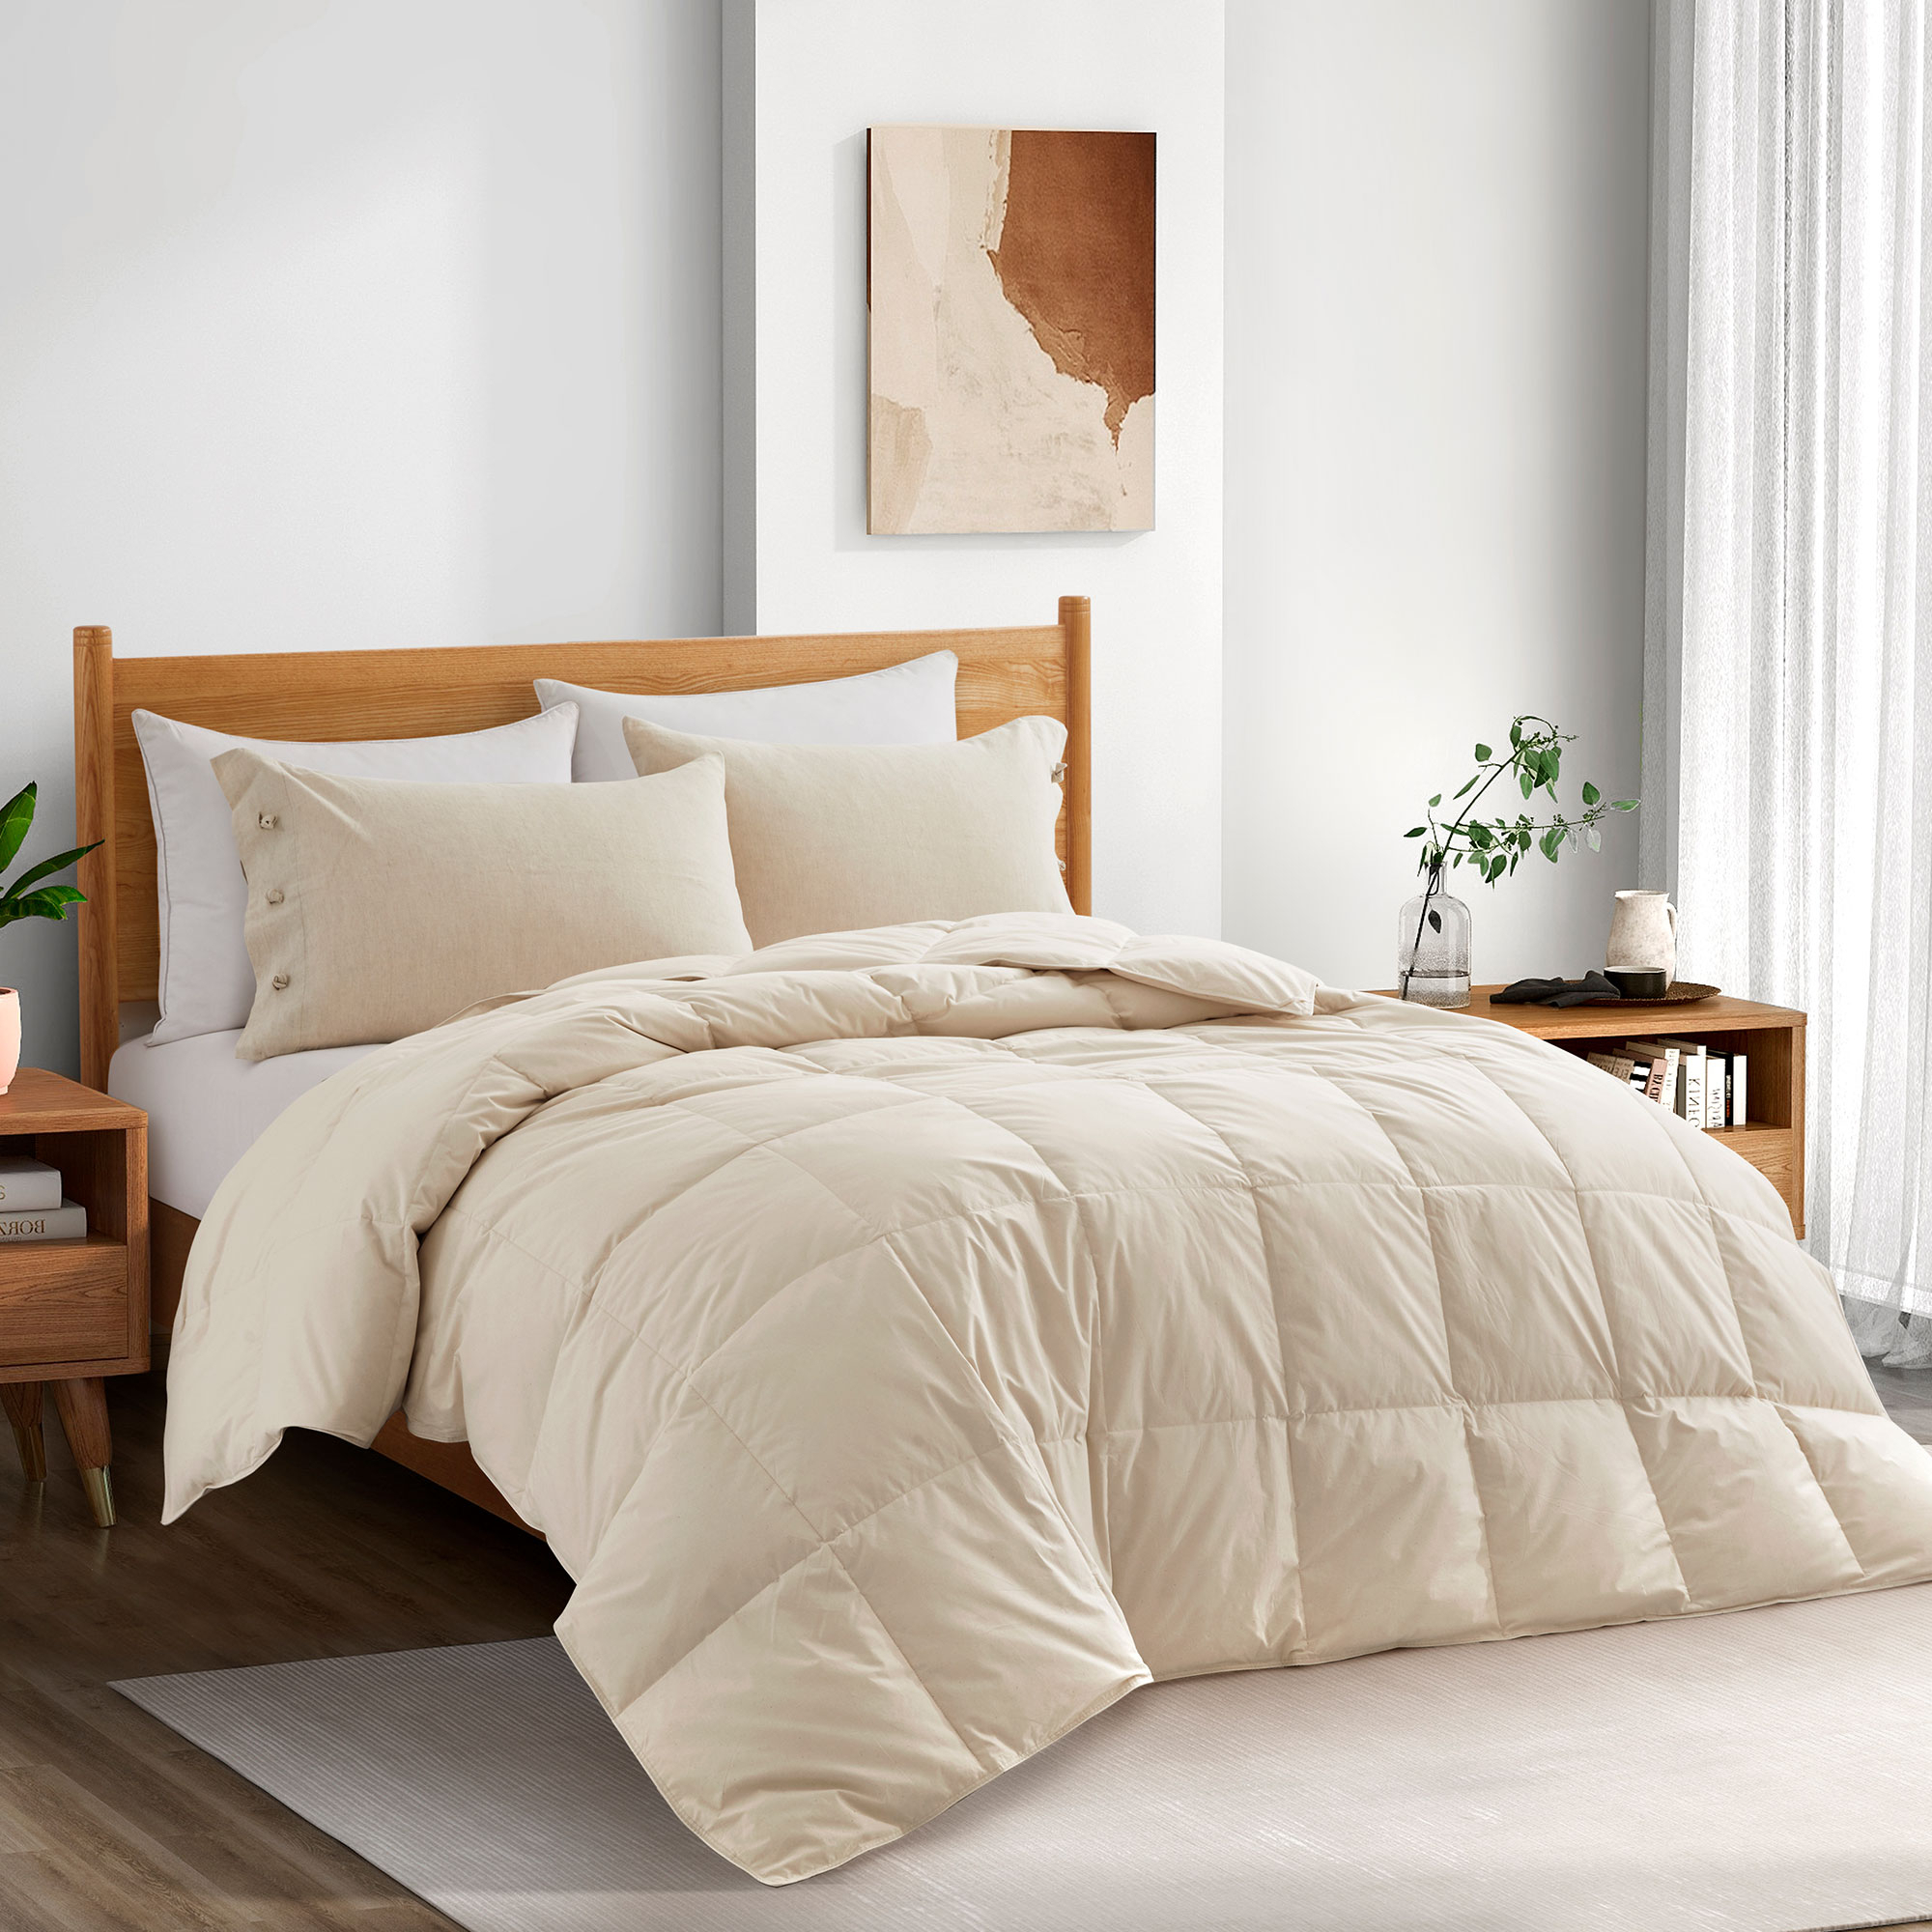 All Season Organic Cotton Comforter Filled With Down And Feather Fiber - Off White, Twin